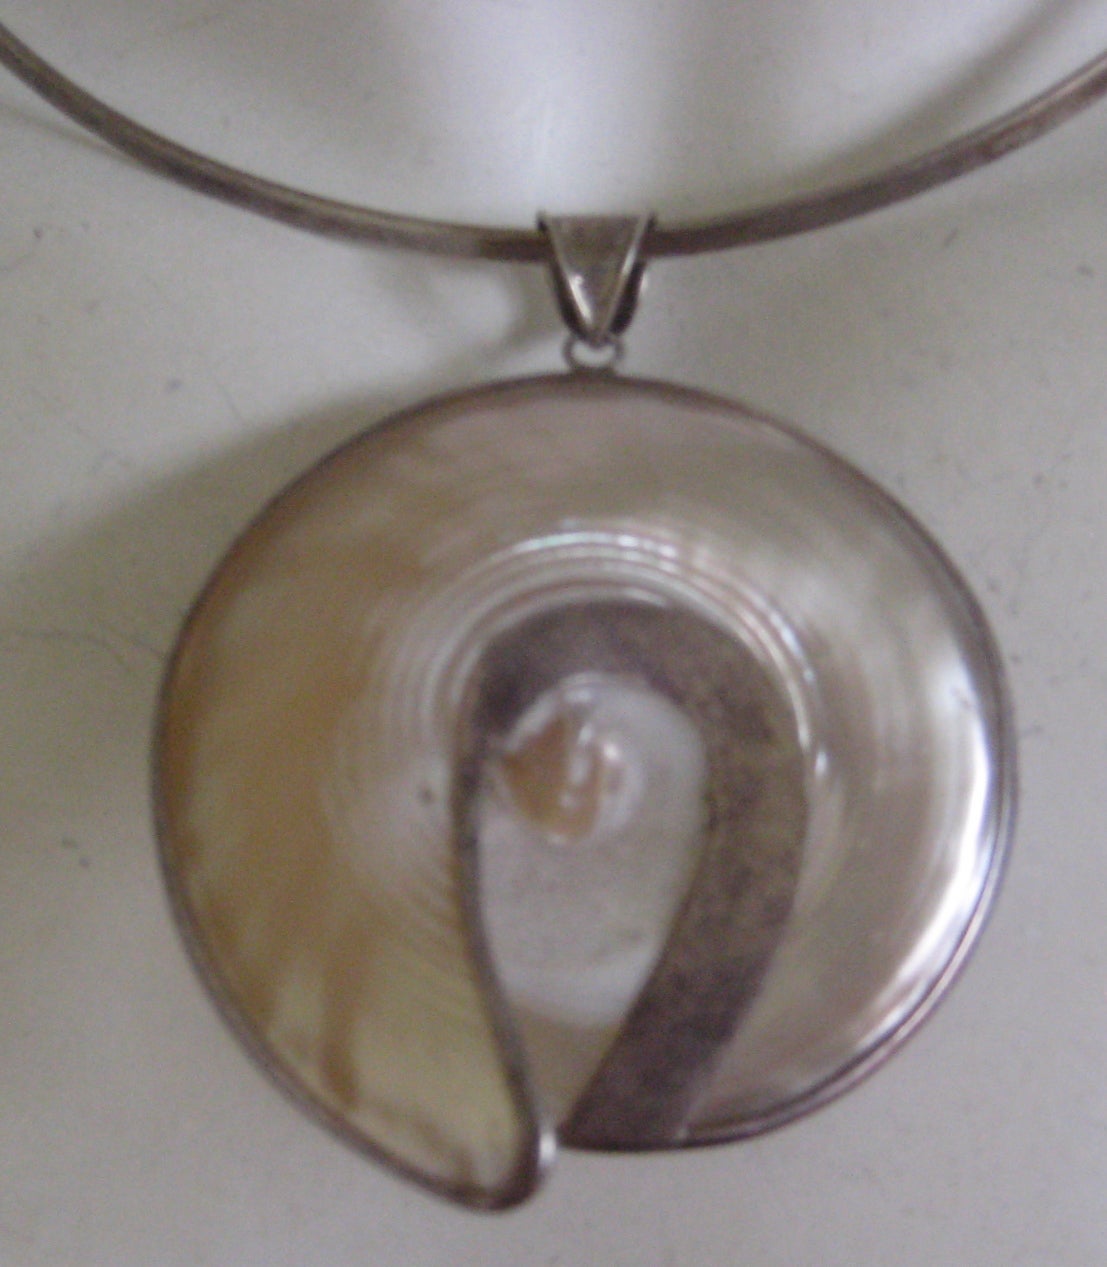 Very pretty shell encased in sterling silver .Sterling collar is stamped 925 James avery and shell pendant is un marked sterling.
This lovely necklace dates to the 1970s and it is in excellent condition